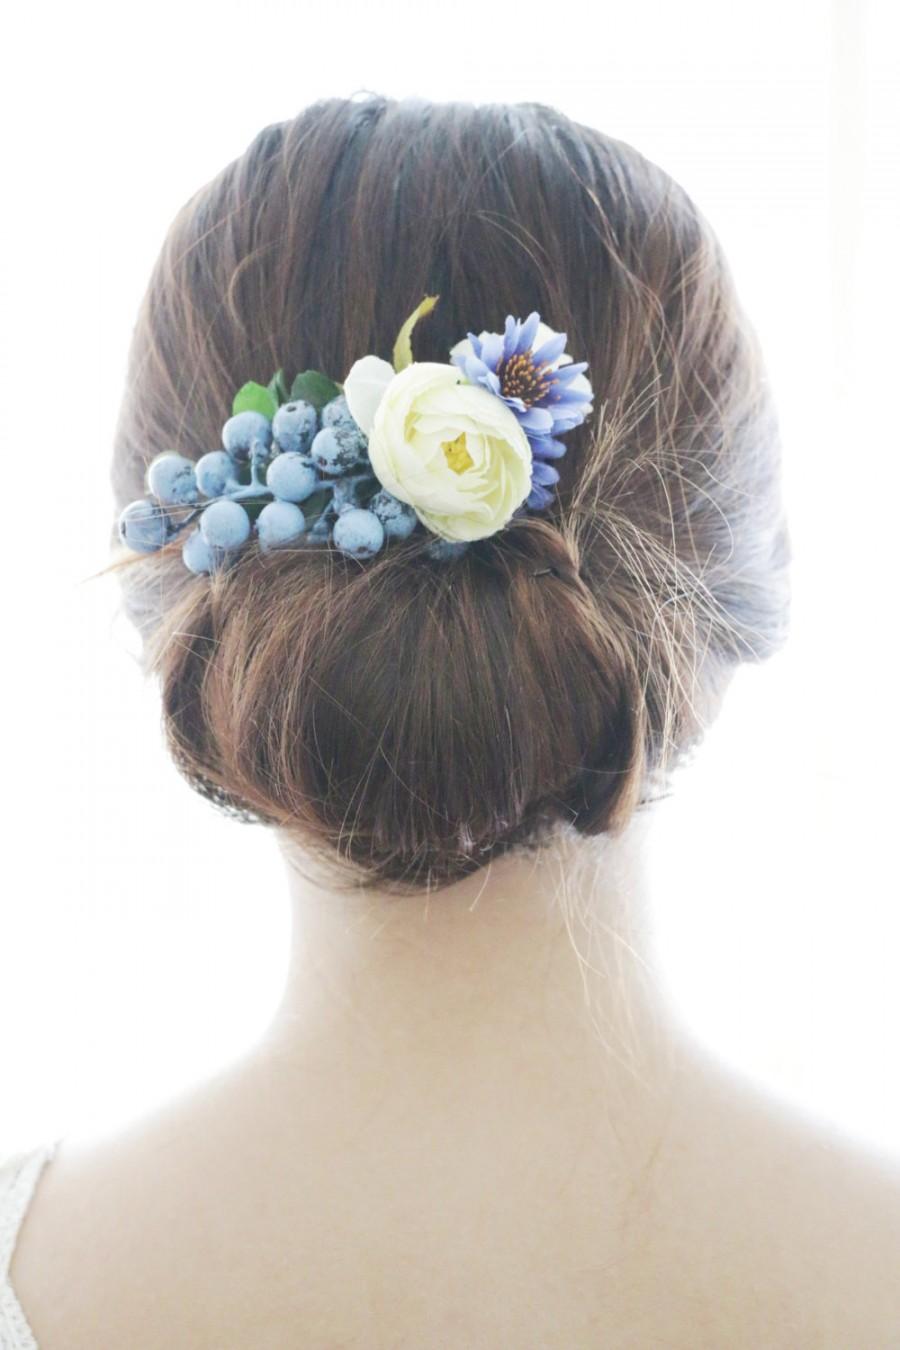 Mariage - Bridal Hair Accessory, Blue Daisy & blueberries, Bridal Hair comb hairpiece flower, Bridesmaid, Rustic Vintage outdoor wedding woodland